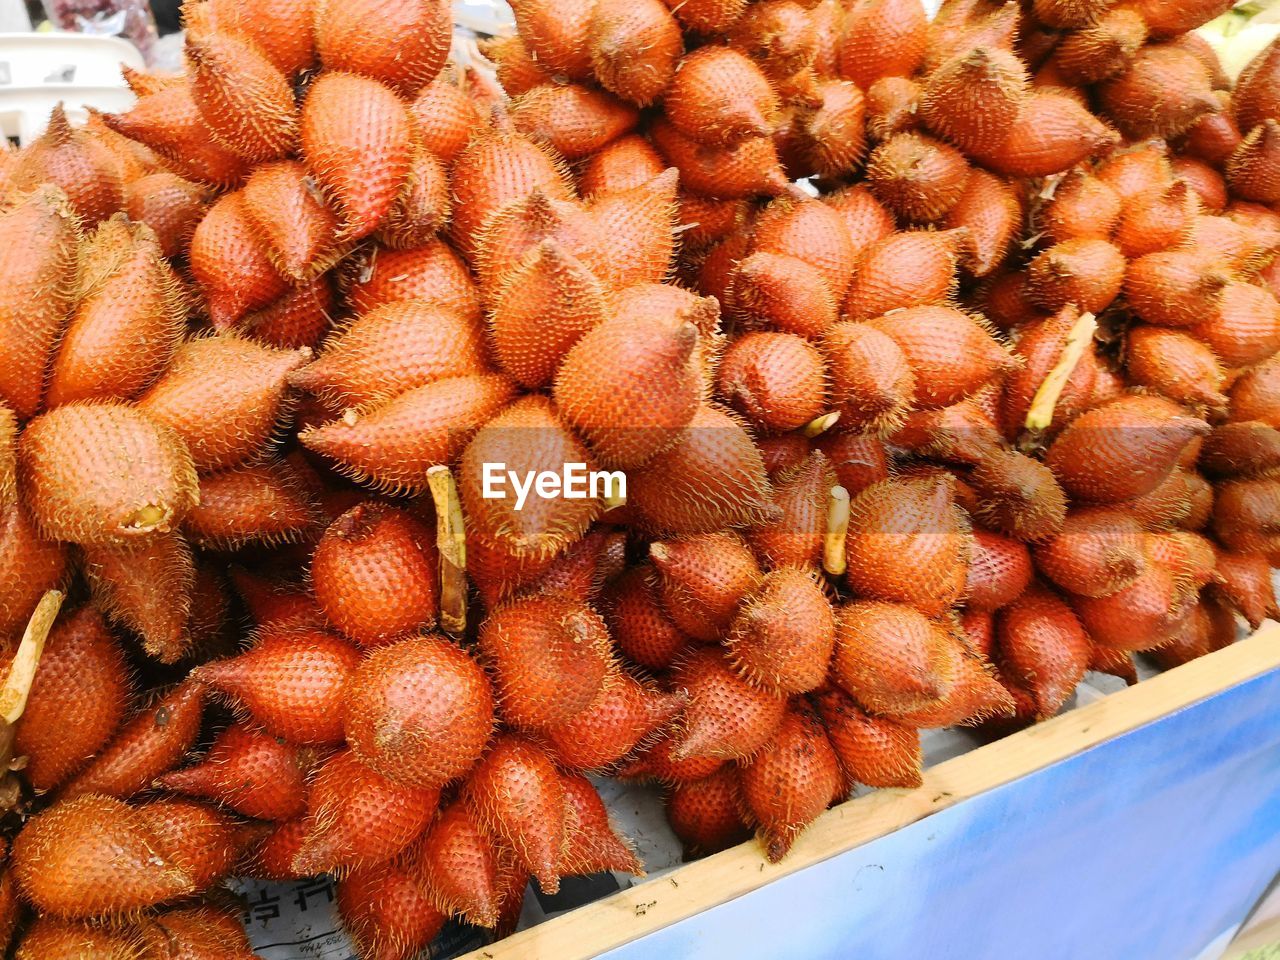 CLOSE-UP OF FRUITS FOR SALE IN MARKET STALL